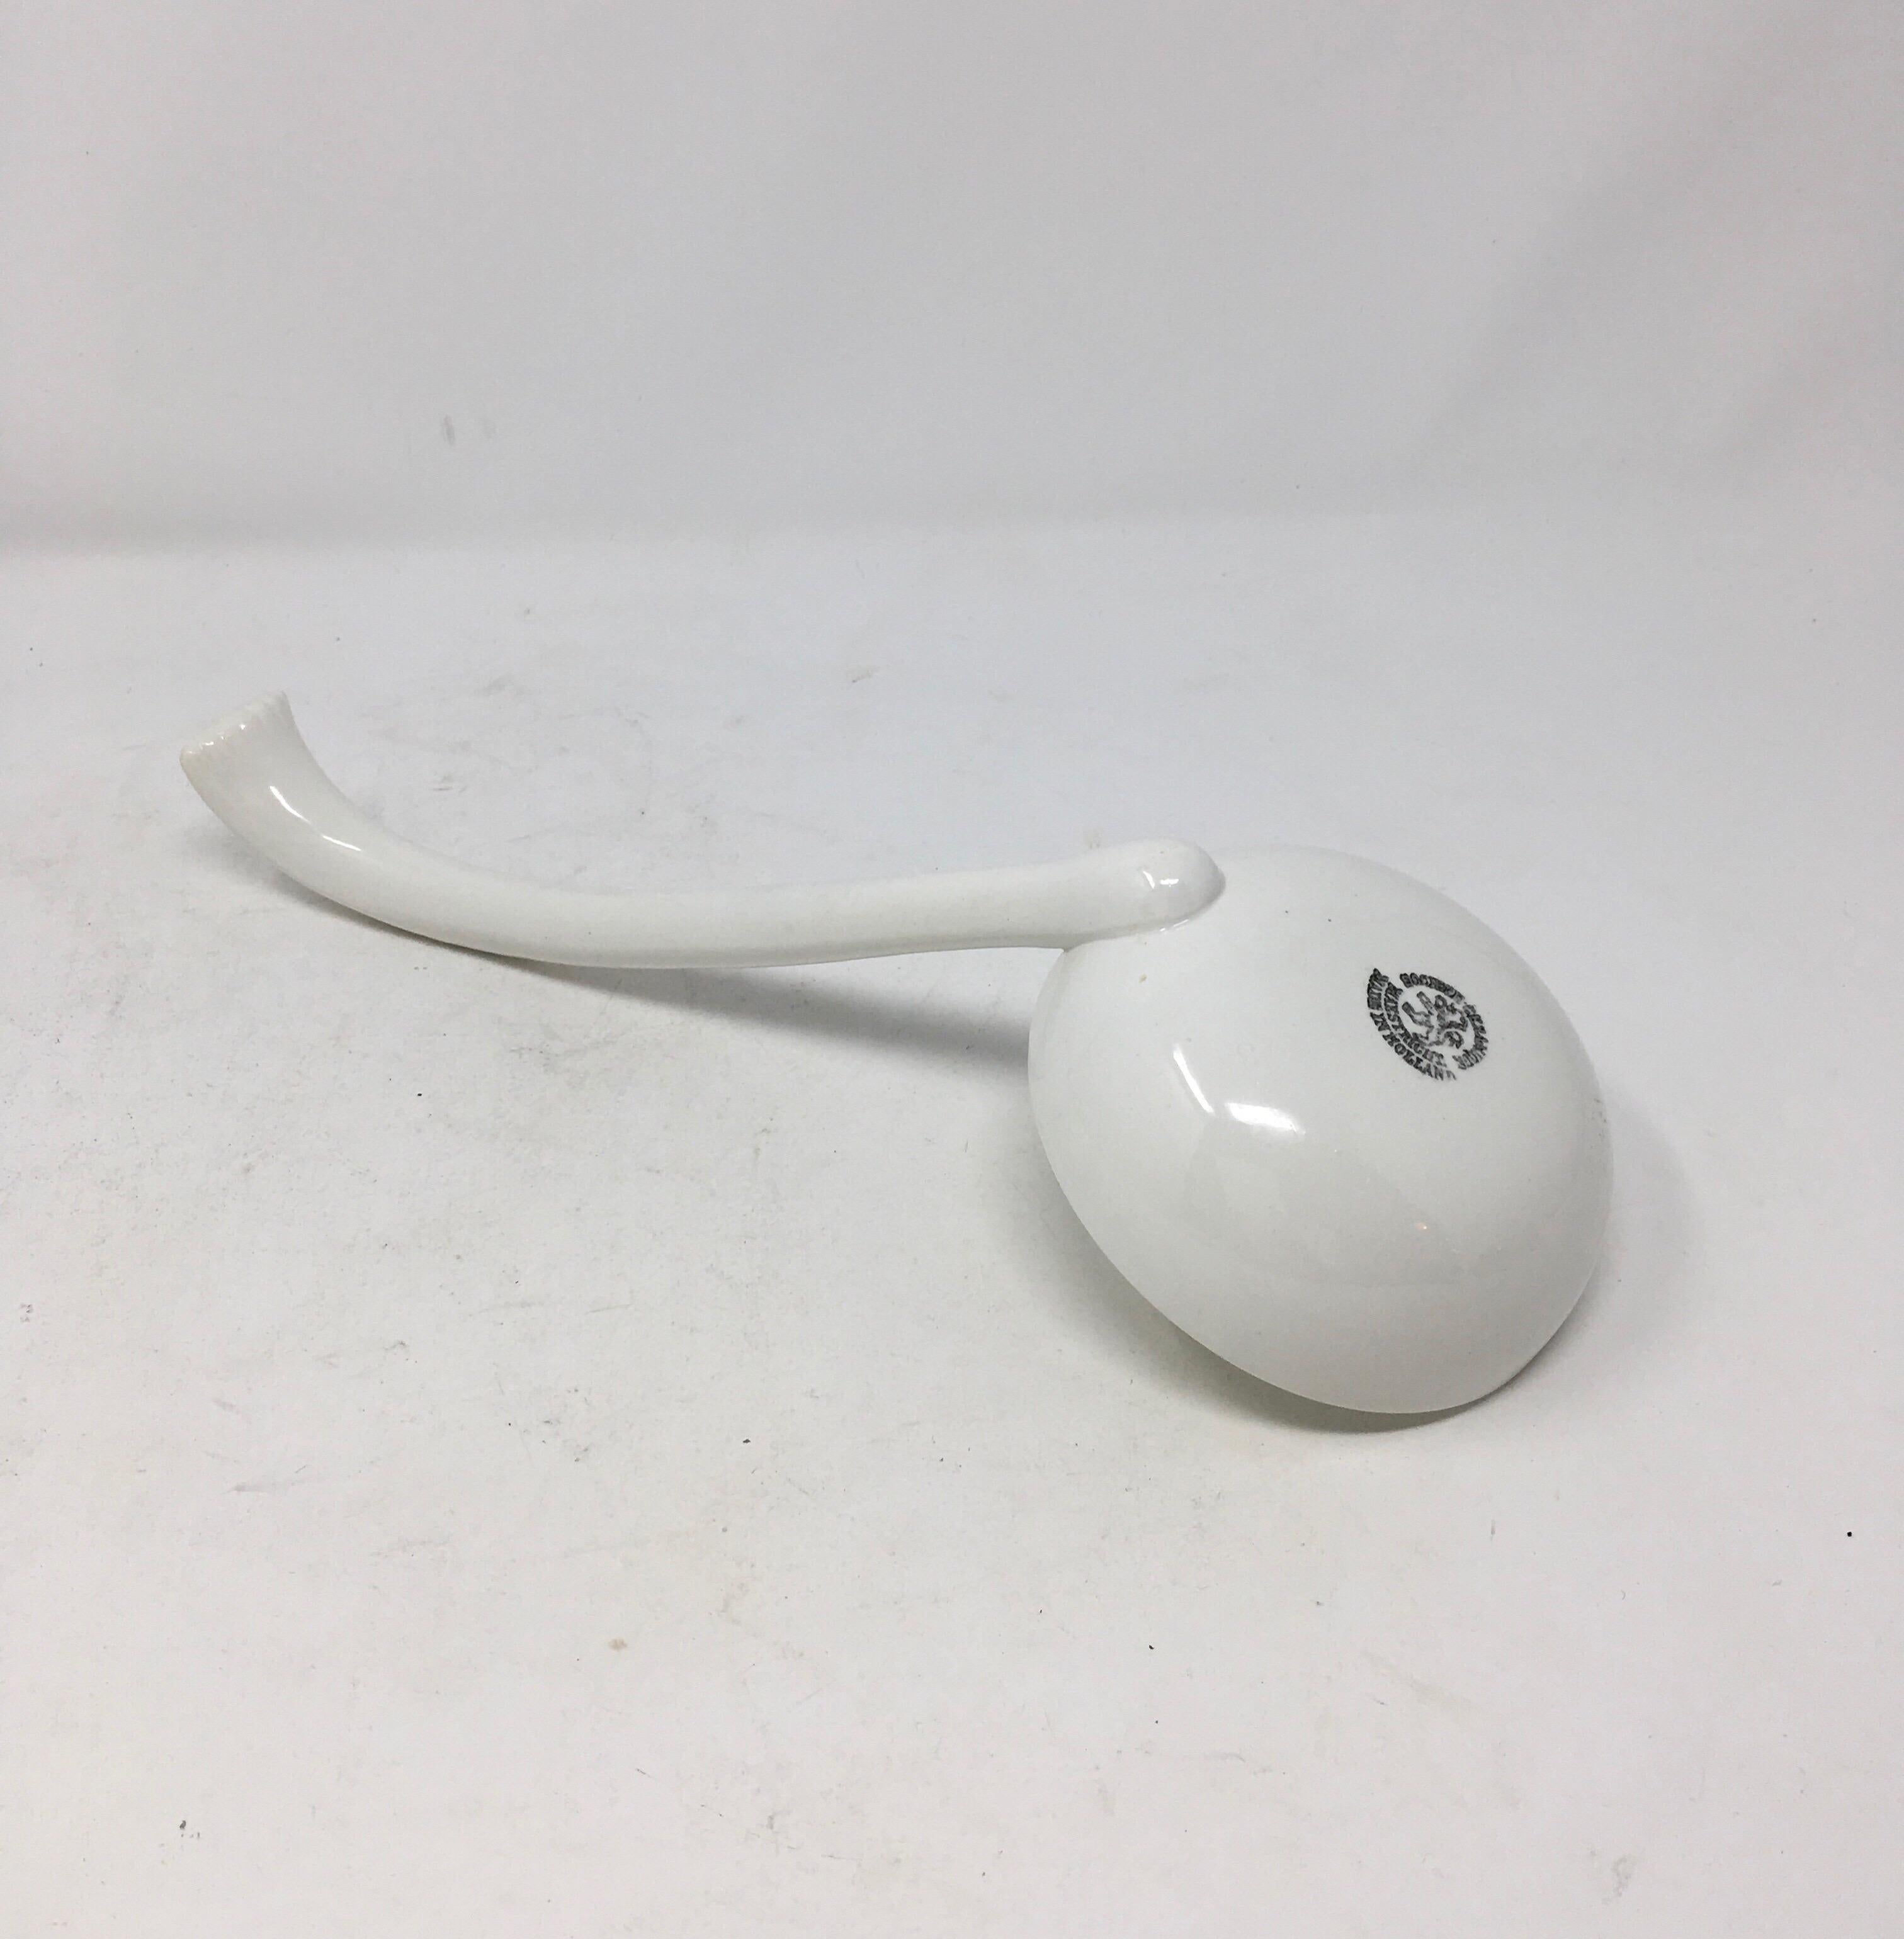 A rare find, this large Dutch antique white ironstone ladle is marked on the bottom of the bowl with a black underglaze stamp: Societe Ceramique Maestricht, made in Holland. Societe Ceramique produced ironstone in Maestricht from 1863-1955. The